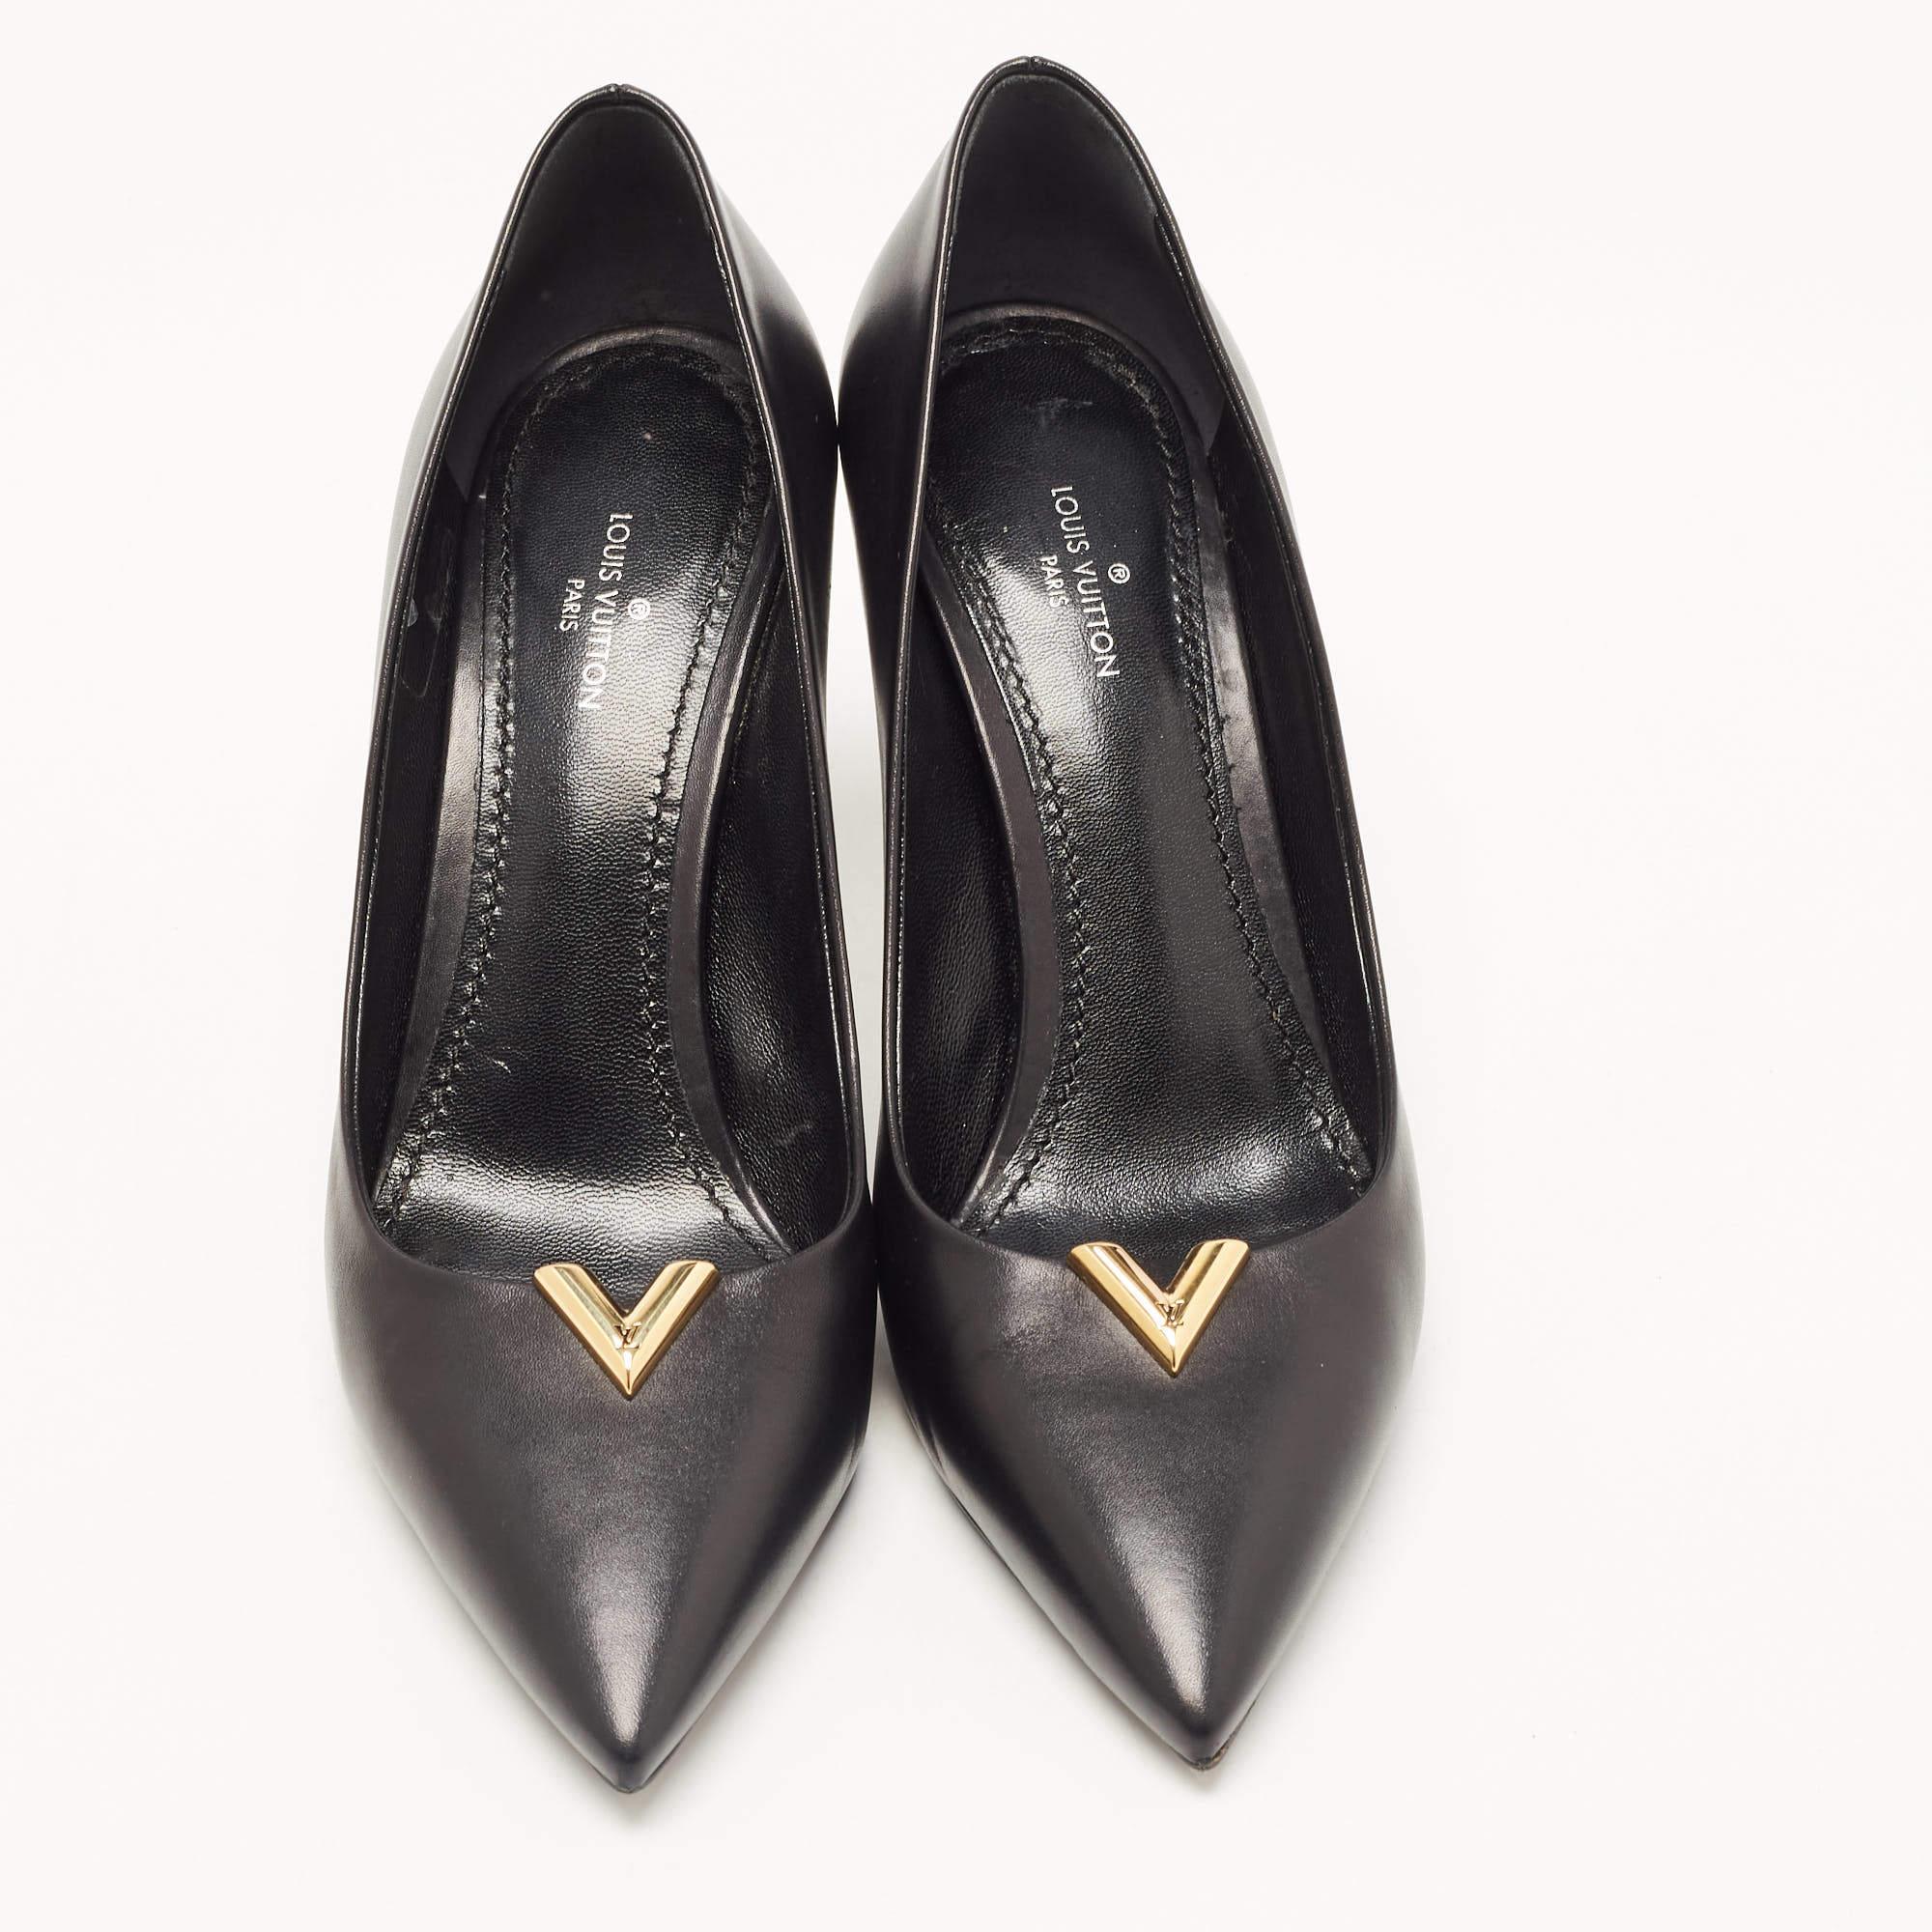 Complement your well-put-together outfit with these authentic Louis Vuitton pumps. Timeless and classy, they have an amazing construction for enduring quality and comfortable fit.

Includes: Original Dustbag, Original Box

